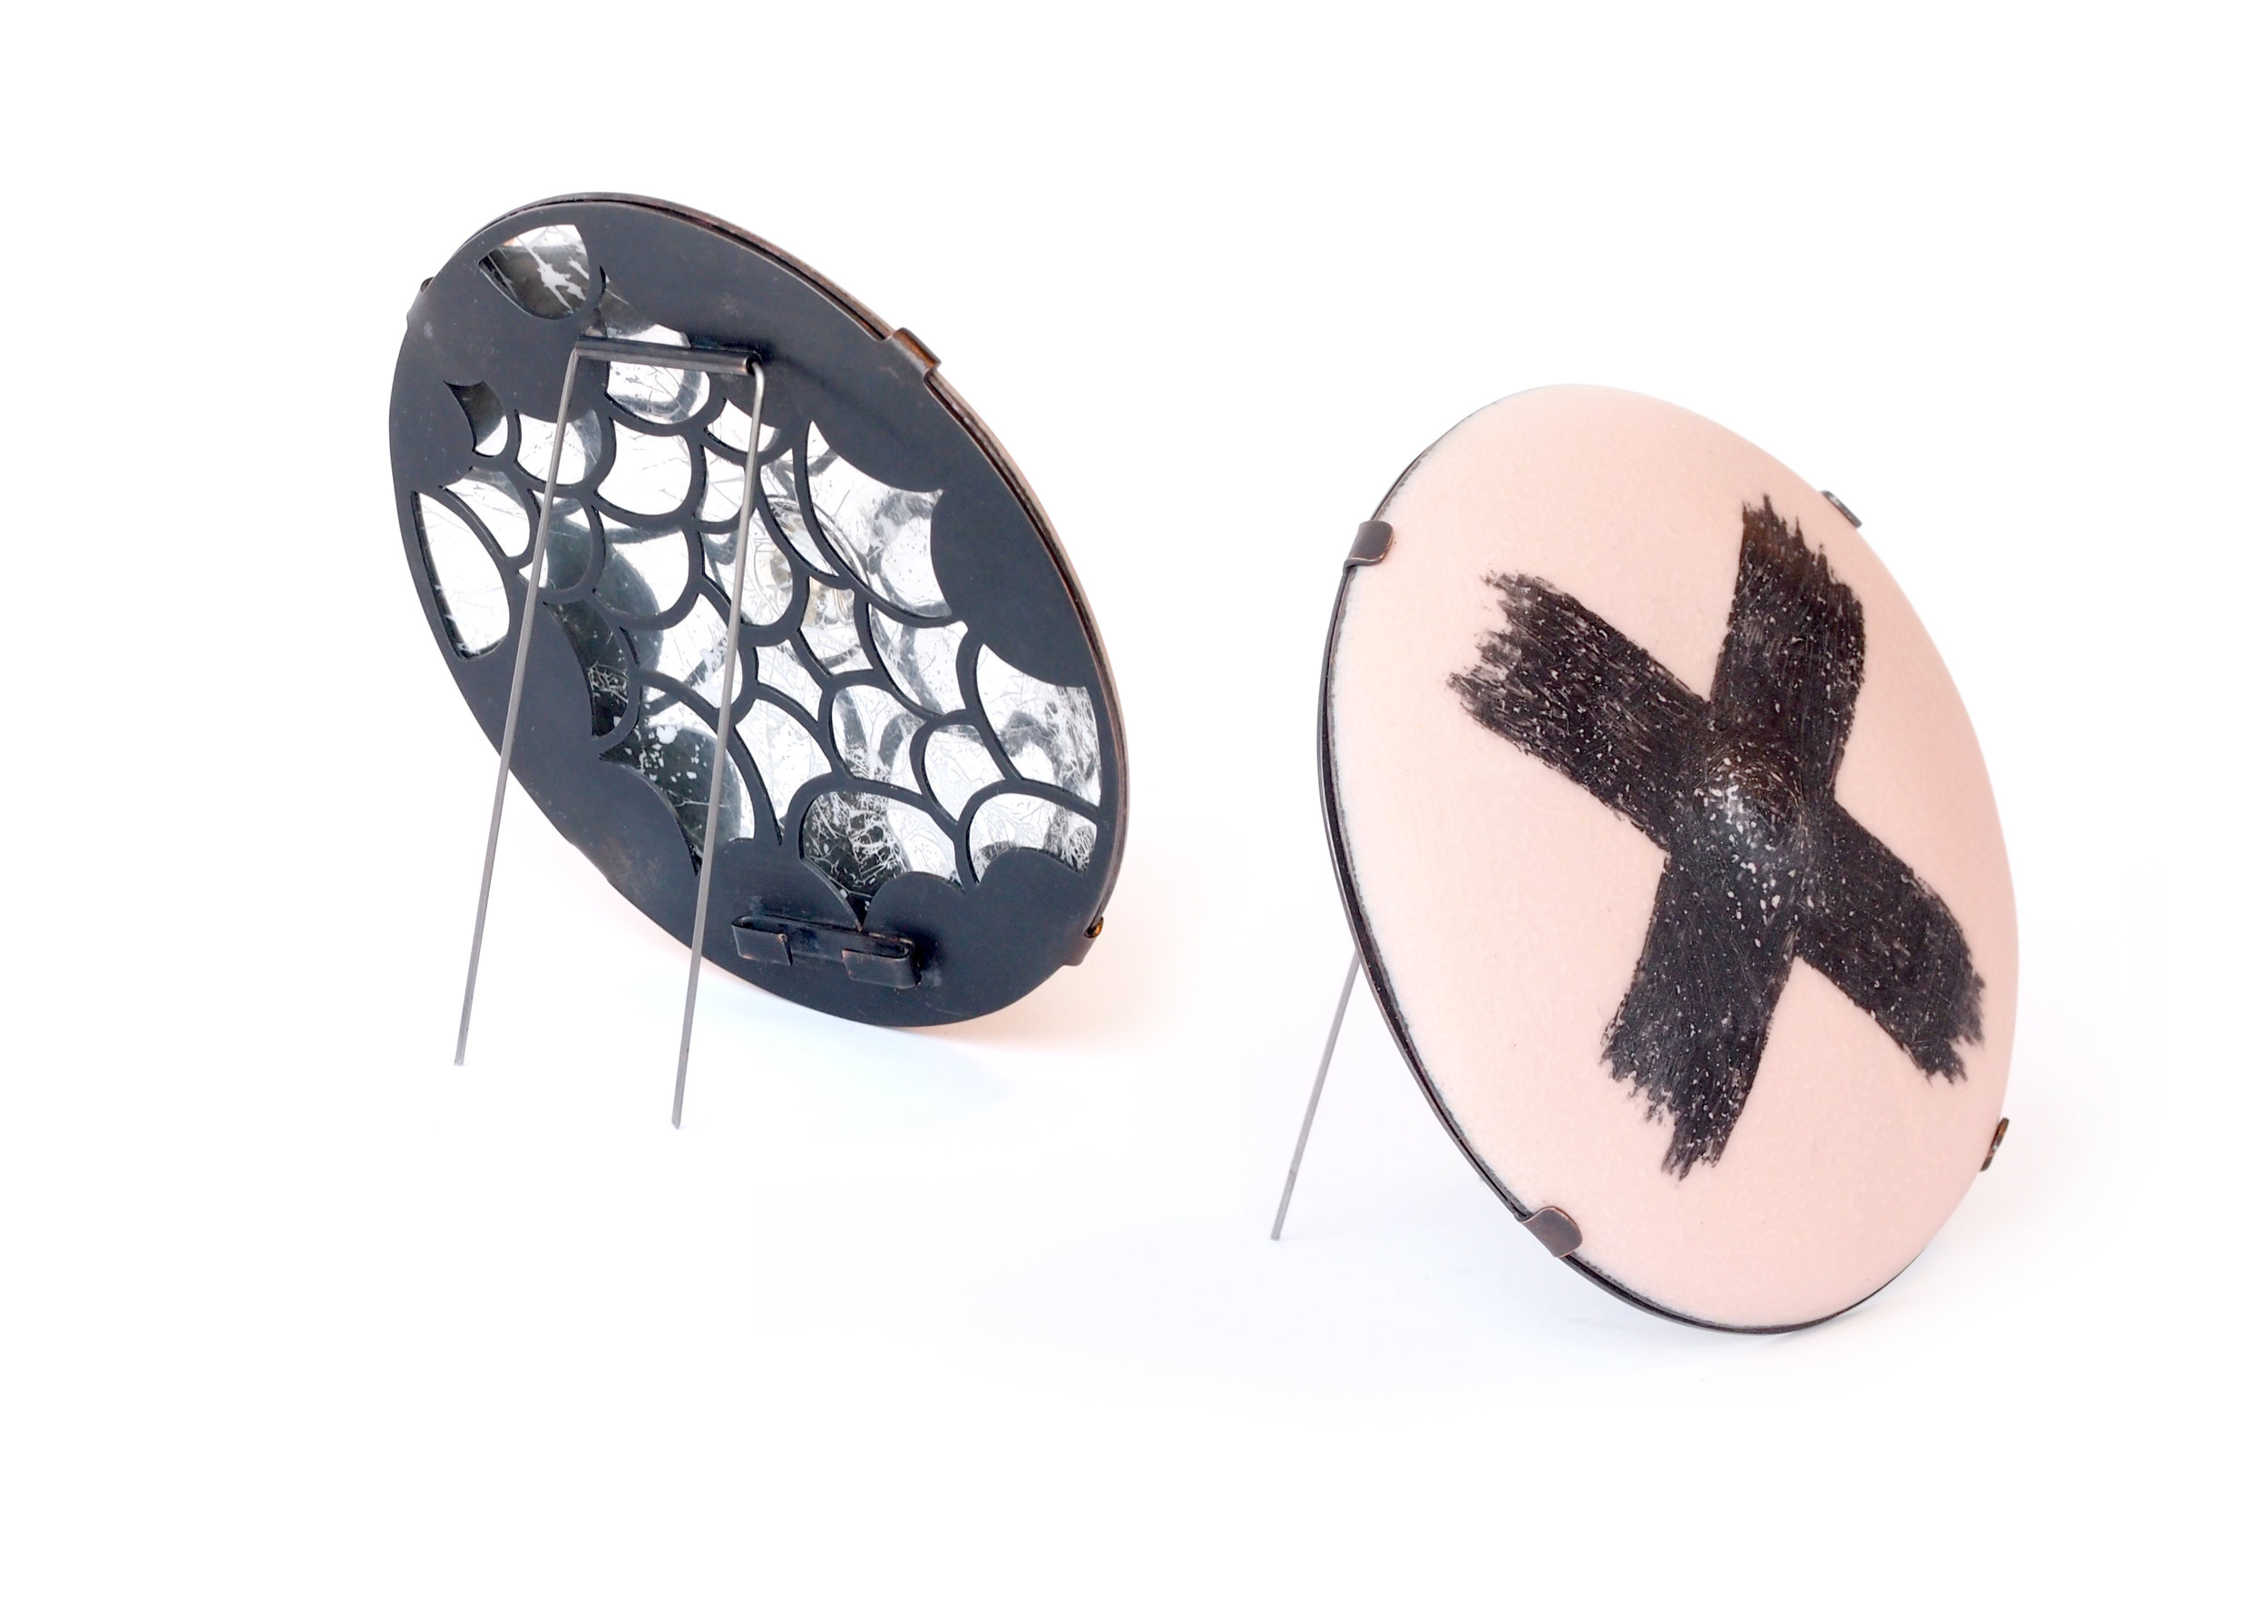  Cover, 2018  Enamel, copper, steel wire. (Front and back) Brooch 